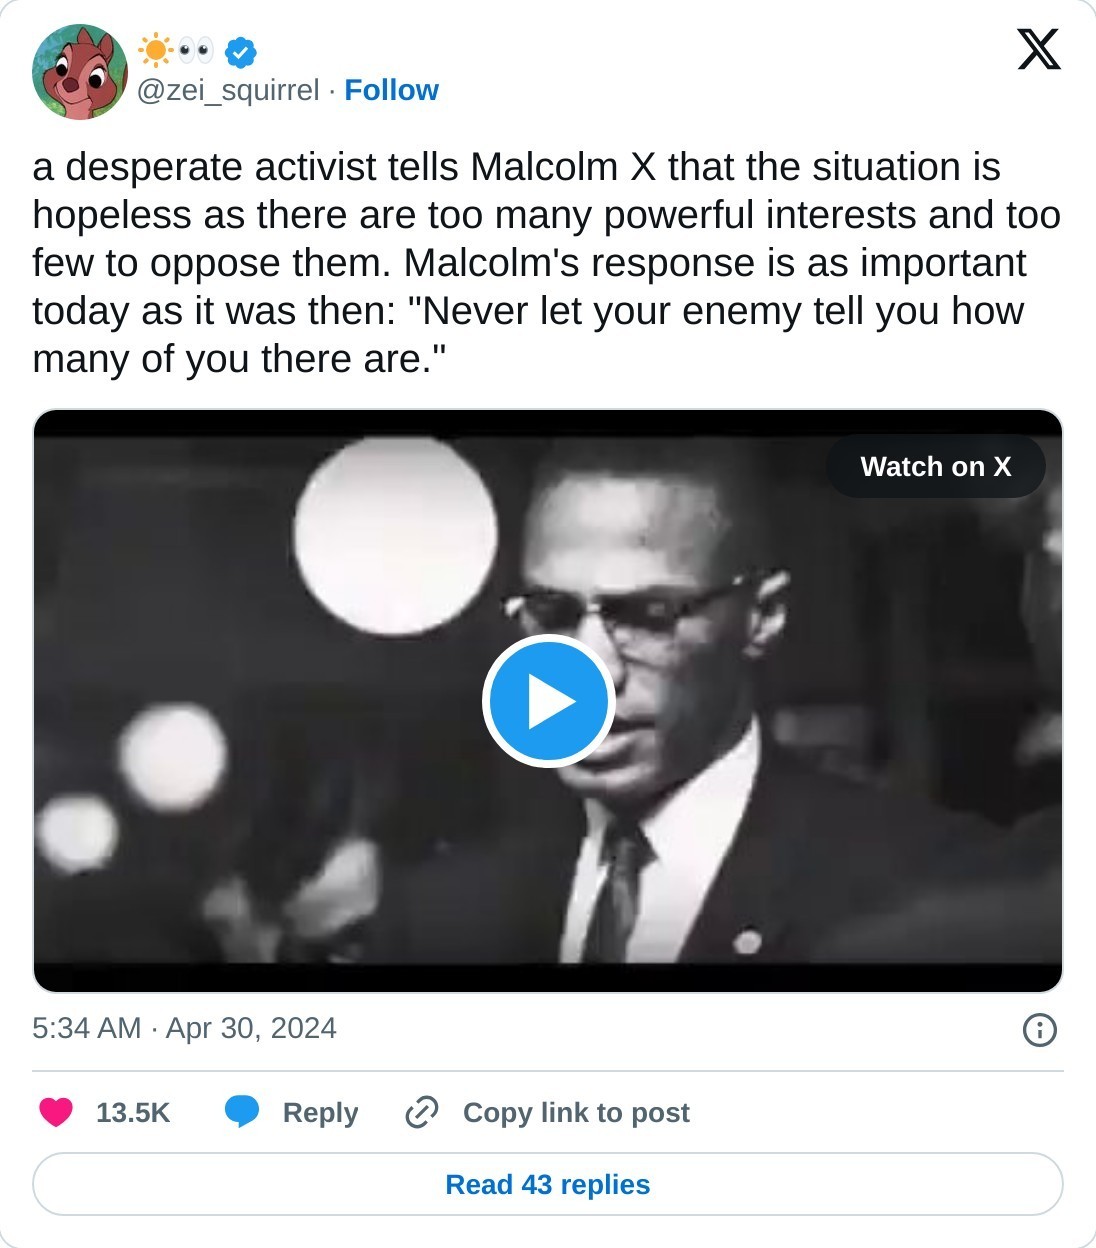 a desperate activist tells Malcolm X that the situation is hopeless as there are too many powerful interests and too few to oppose them. Malcolm's response is as important today as it was then: "Never let your enemy tell you how many of you there are." pic.twitter.com/obeKpO9SJr  — ☀️👀 (@zei_squirrel) April 30, 2024